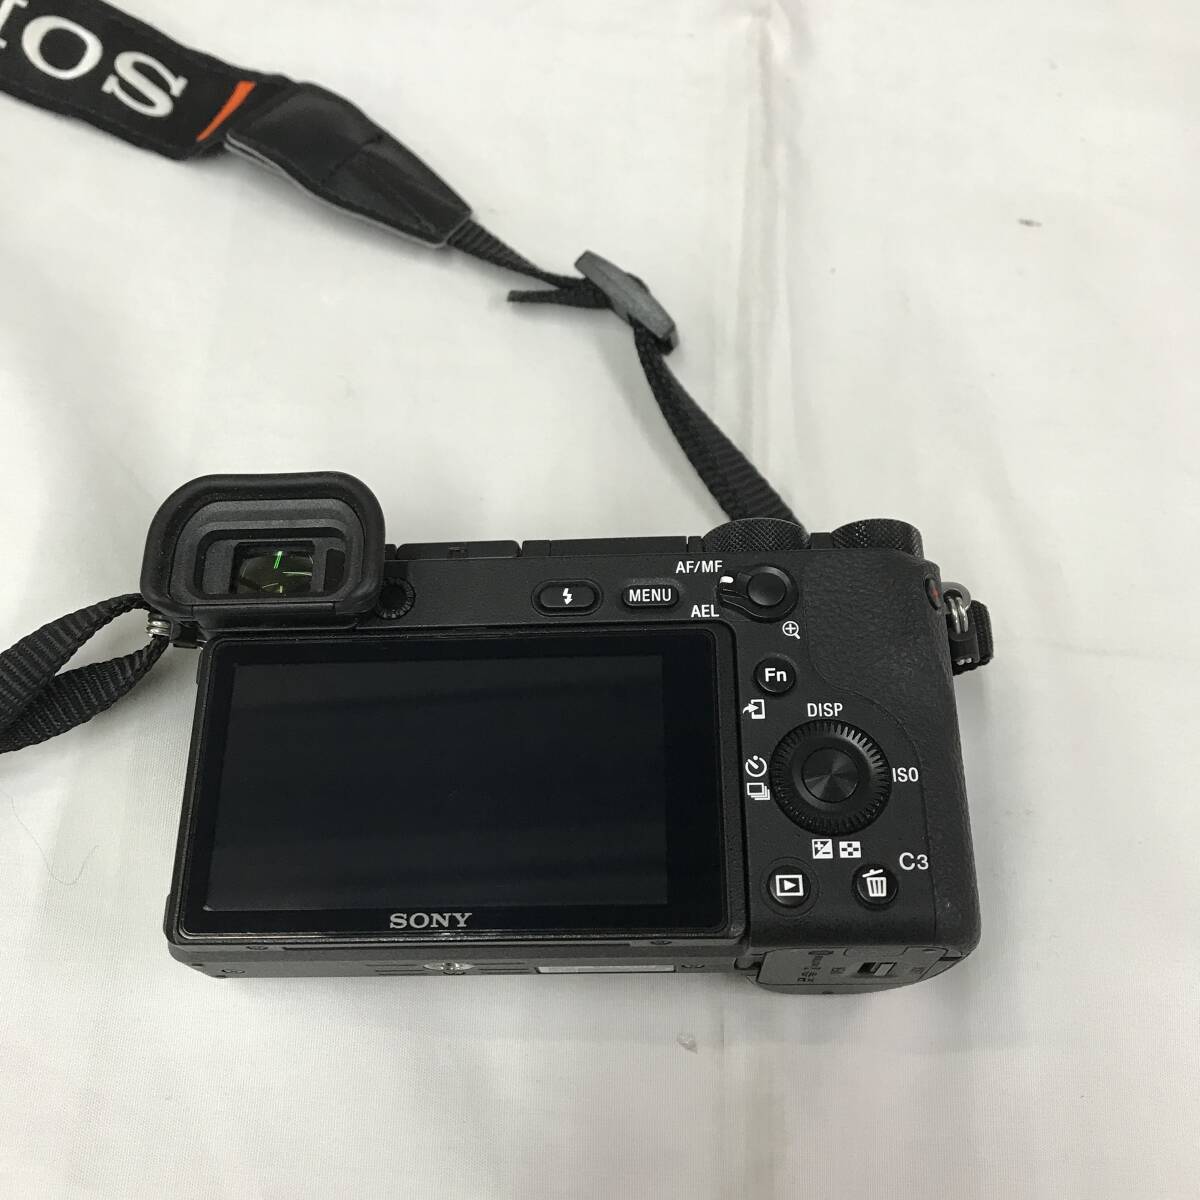 sy093 送料無料！バッテリー無し現状品 SONY ソニー α6500 ボディ ILCE-6500の画像4